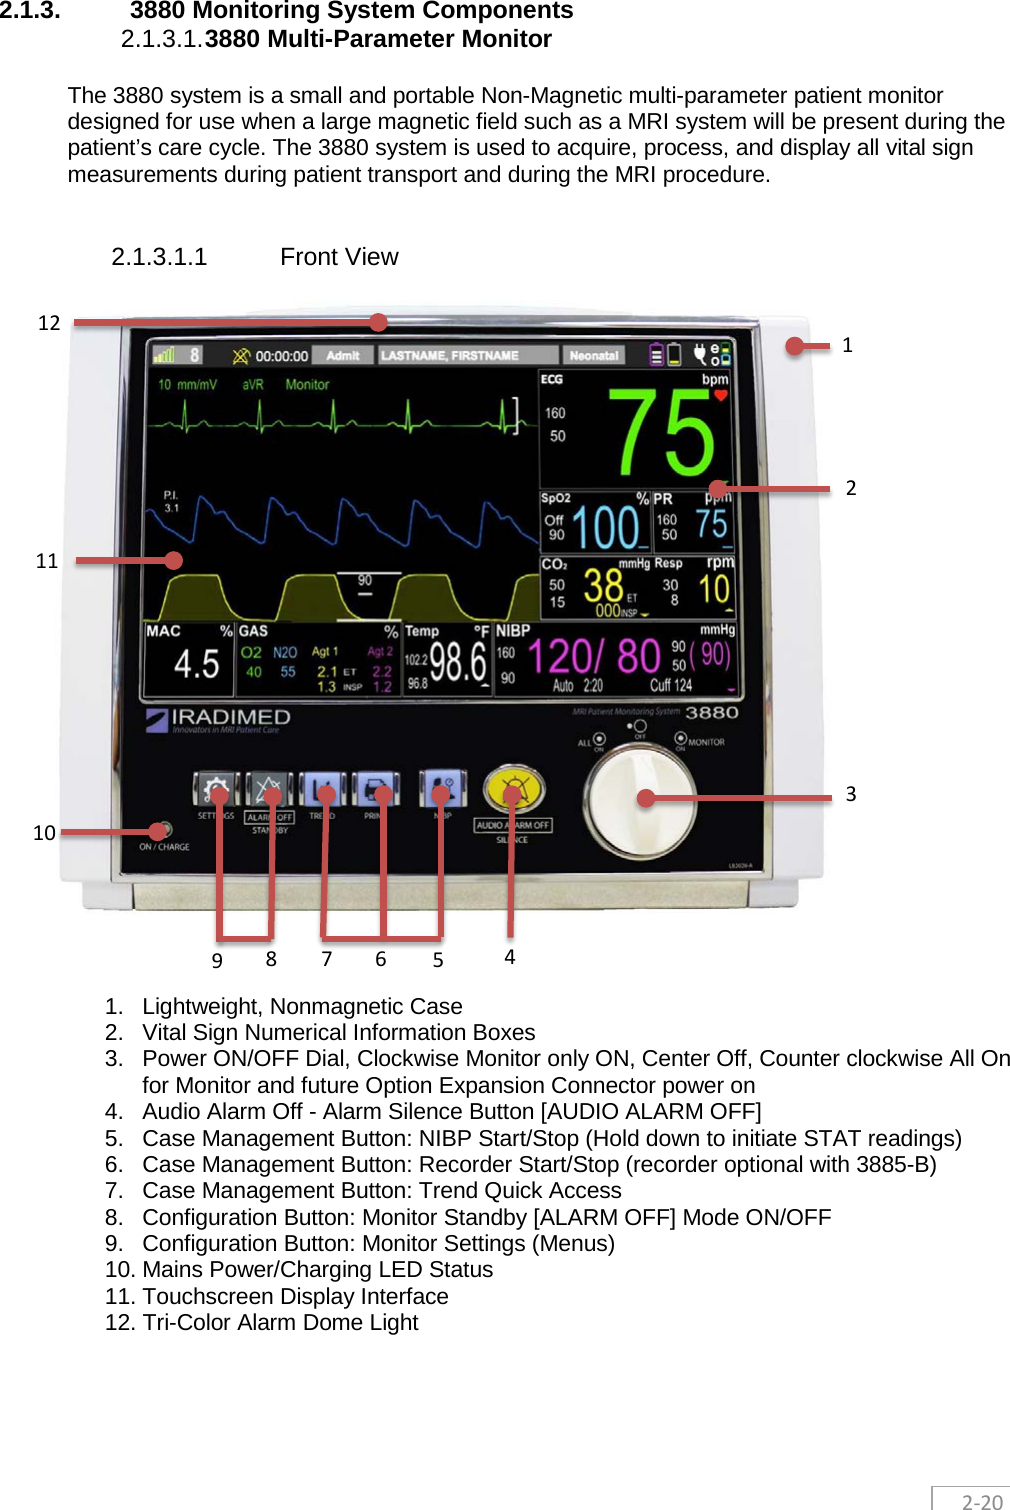  2-20 2.1.3. 3880 Monitoring System Components 2.1.3.1. 3880 Multi-Parameter Monitor The 3880 system is a small and portable Non-Magnetic multi-parameter patient monitor designed for use when a large magnetic field such as a MRI system will be present during the patient’s care cycle. The 3880 system is used to acquire, process, and display all vital sign measurements during patient transport and during the MRI procedure.   2.1.3.1.1 Front View     1. Lightweight, Nonmagnetic Case 2. Vital Sign Numerical Information Boxes 3. Power ON/OFF Dial, Clockwise Monitor only ON, Center Off, Counter clockwise All On for Monitor and future Option Expansion Connector power on  4. Audio Alarm Off - Alarm Silence Button [AUDIO ALARM OFF] 5. Case Management Button: NIBP Start/Stop (Hold down to initiate STAT readings) 6. Case Management Button: Recorder Start/Stop (recorder optional with 3885-B) 7. Case Management Button: Trend Quick Access  8. Configuration Button: Monitor Standby [ALARM OFF] Mode ON/OFF 9. Configuration Button: Monitor Settings (Menus) 10. Mains Power/Charging LED Status 11. Touchscreen Display Interface 12. Tri-Color Alarm Dome Light    6 1 2 3 4 5 7 8 9 10 11 12 